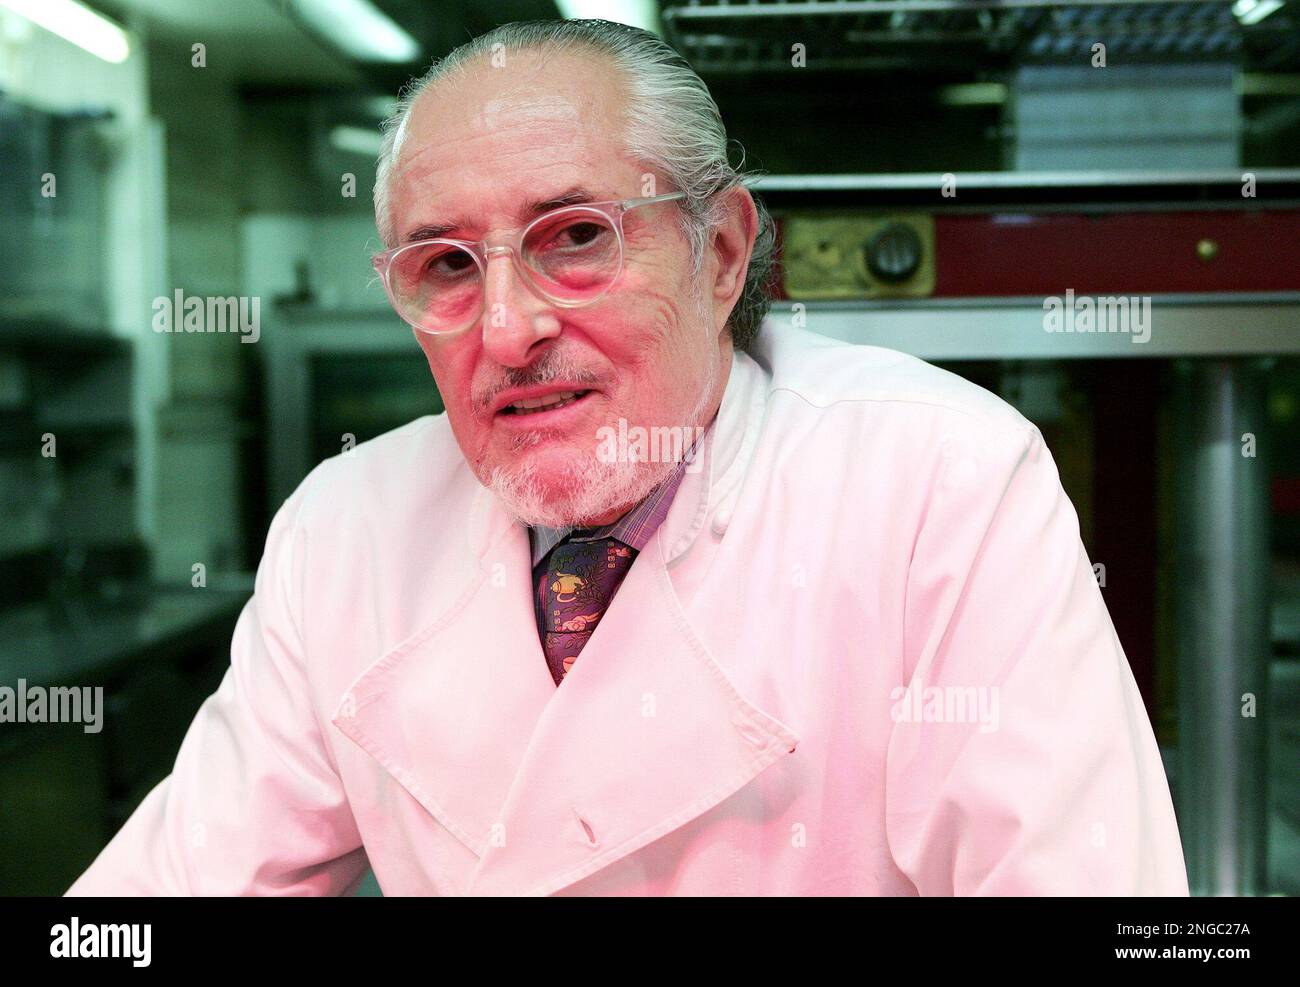 Top French chef Alain Senderens, 65, is photographed in the kitchen of his  Parisian restaurant Lucas Carton, Friday, May 20, 2005. Senderens said he  was giving up his top rating of three